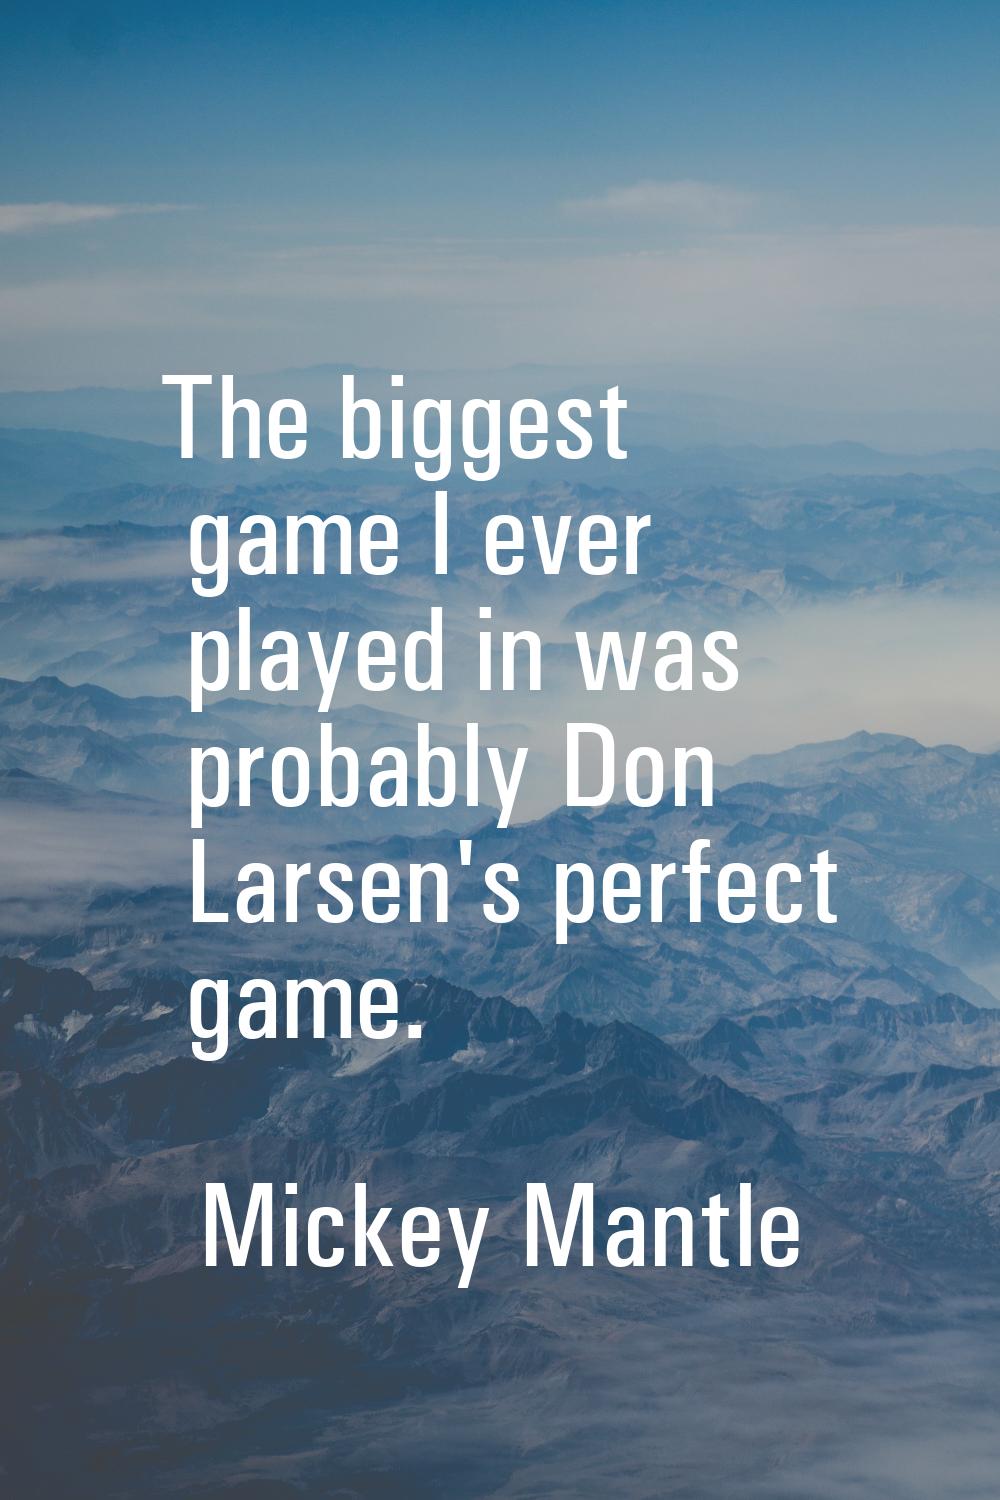 The biggest game I ever played in was probably Don Larsen's perfect game.